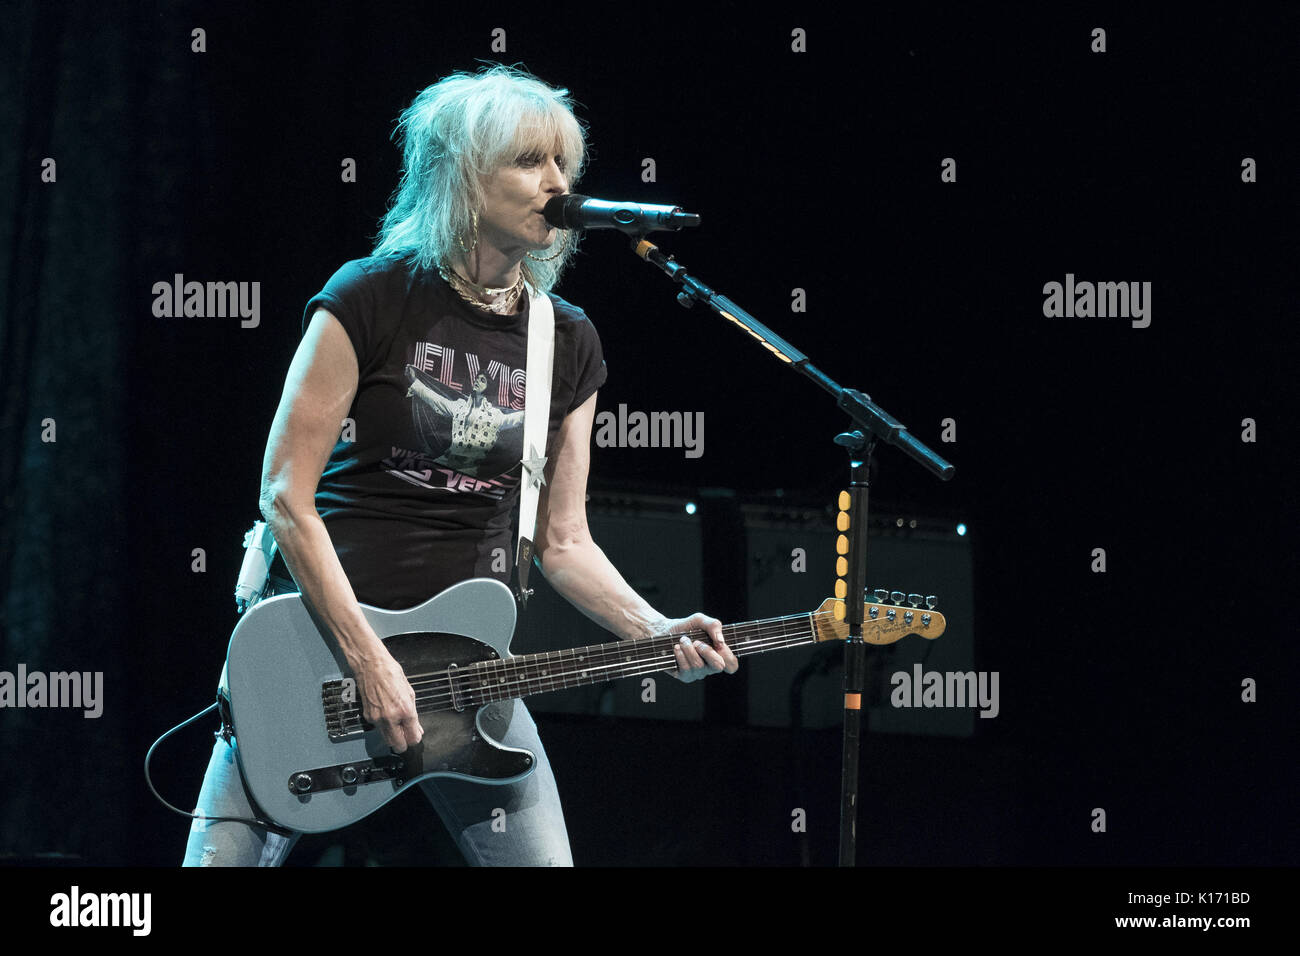 Chrissie Hynde of The Pretenders as the band play the Universal Music Festival 2017 at the Teatro Real in Madrid, Spain.  Featuring: Chrissie Hynde, The Pretenders Where: Madrid, Community of Madrid, Spain When: 24 Jul 2017 Credit: Oscar Gonzalez/WENN.com Stock Photo